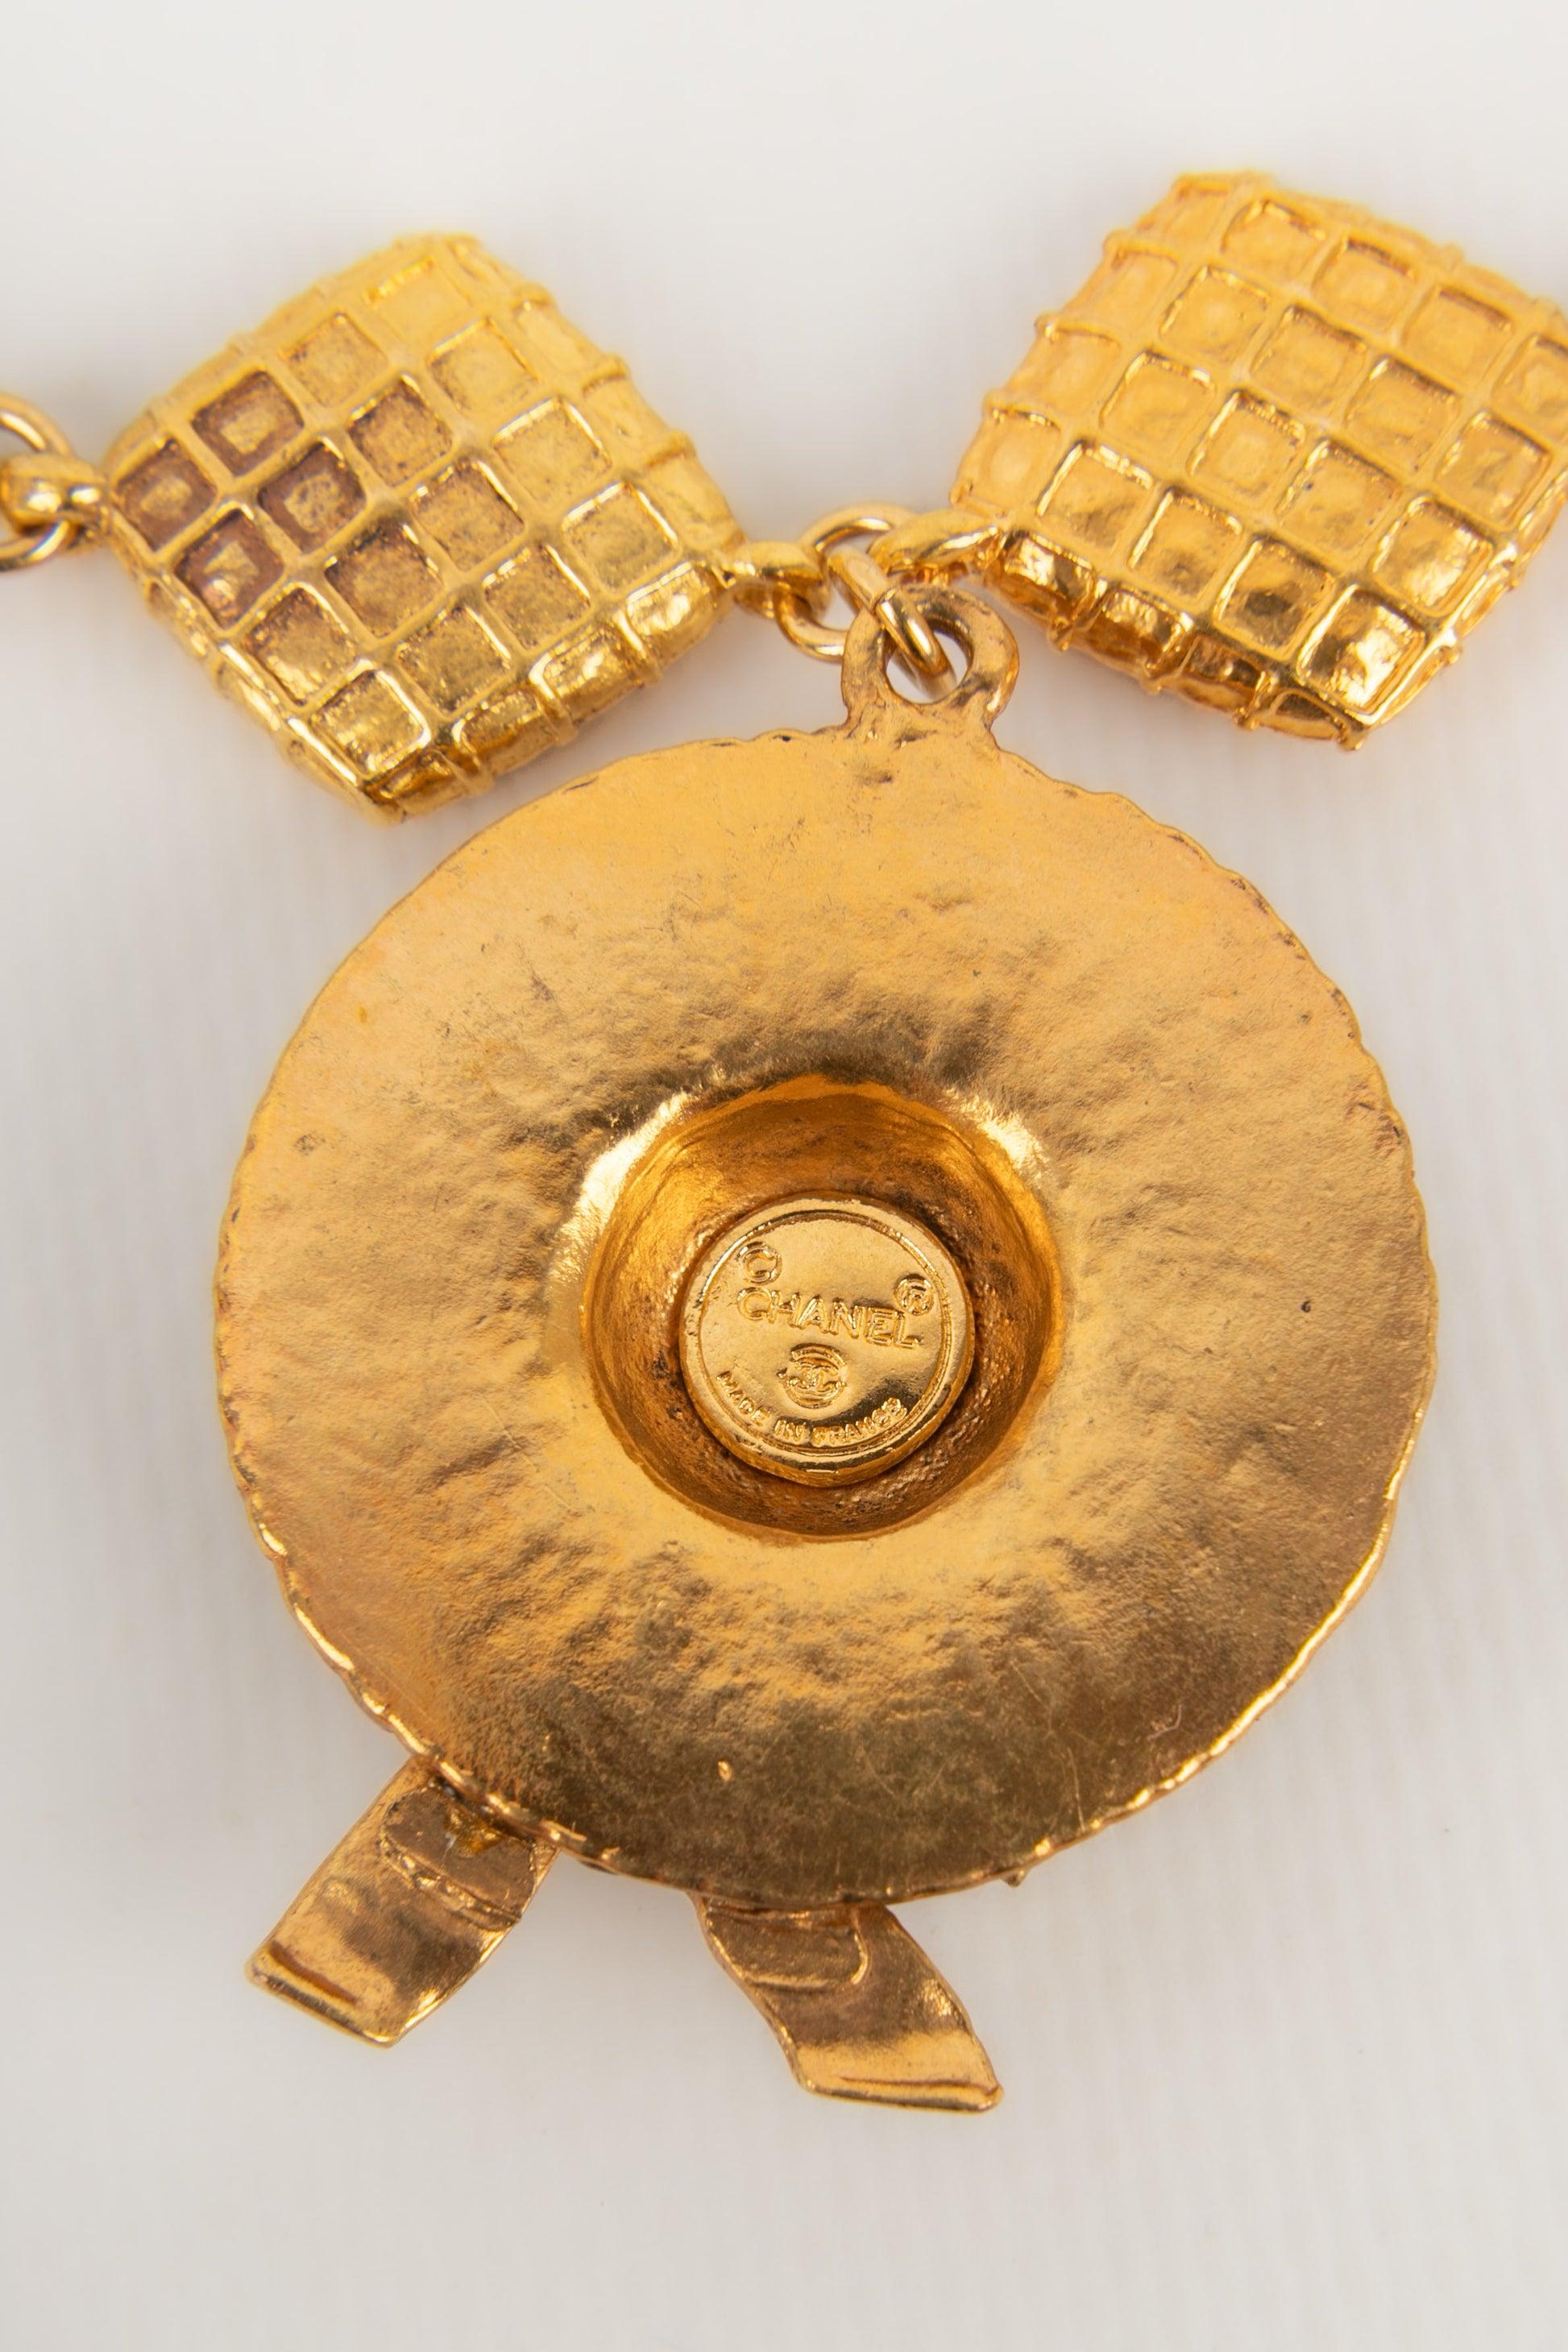 Chanel  Necklace in Golden Metal with Quilted Elements, 1990s For Sale 2